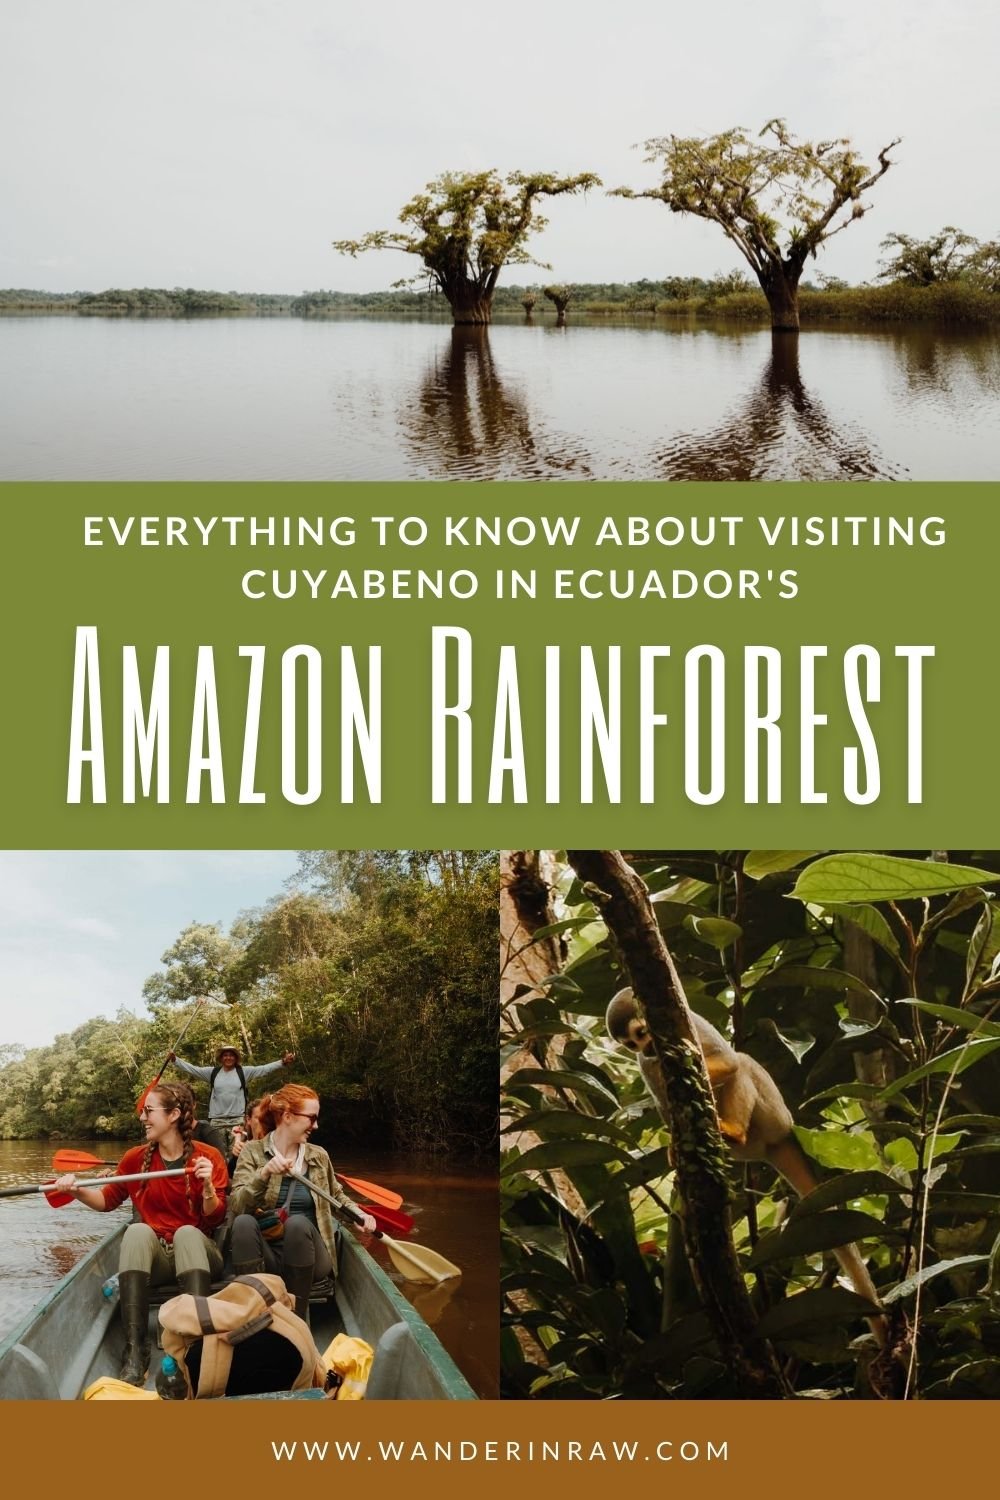 Everything to Know About Visiting Cuyabeno Wildlife Reserve in Ecuador's Amazon